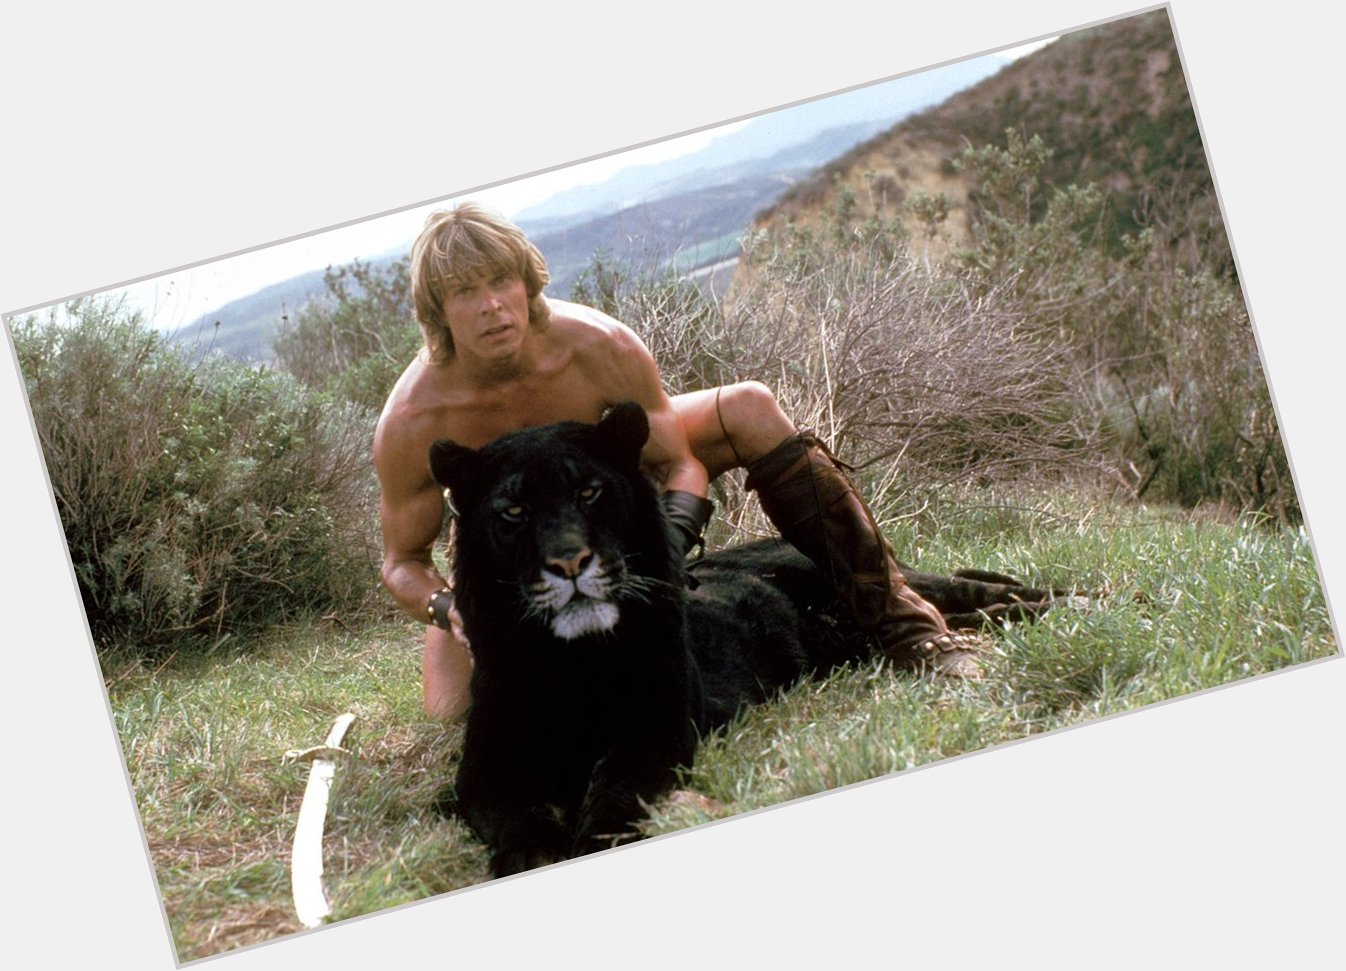 Happy Birthday to The Beastmaster himself, Marc Singer! 